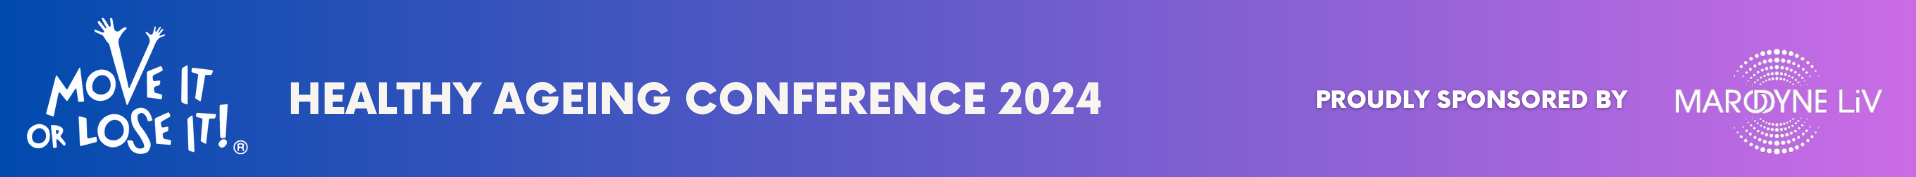 Healthy ageing conference 2024